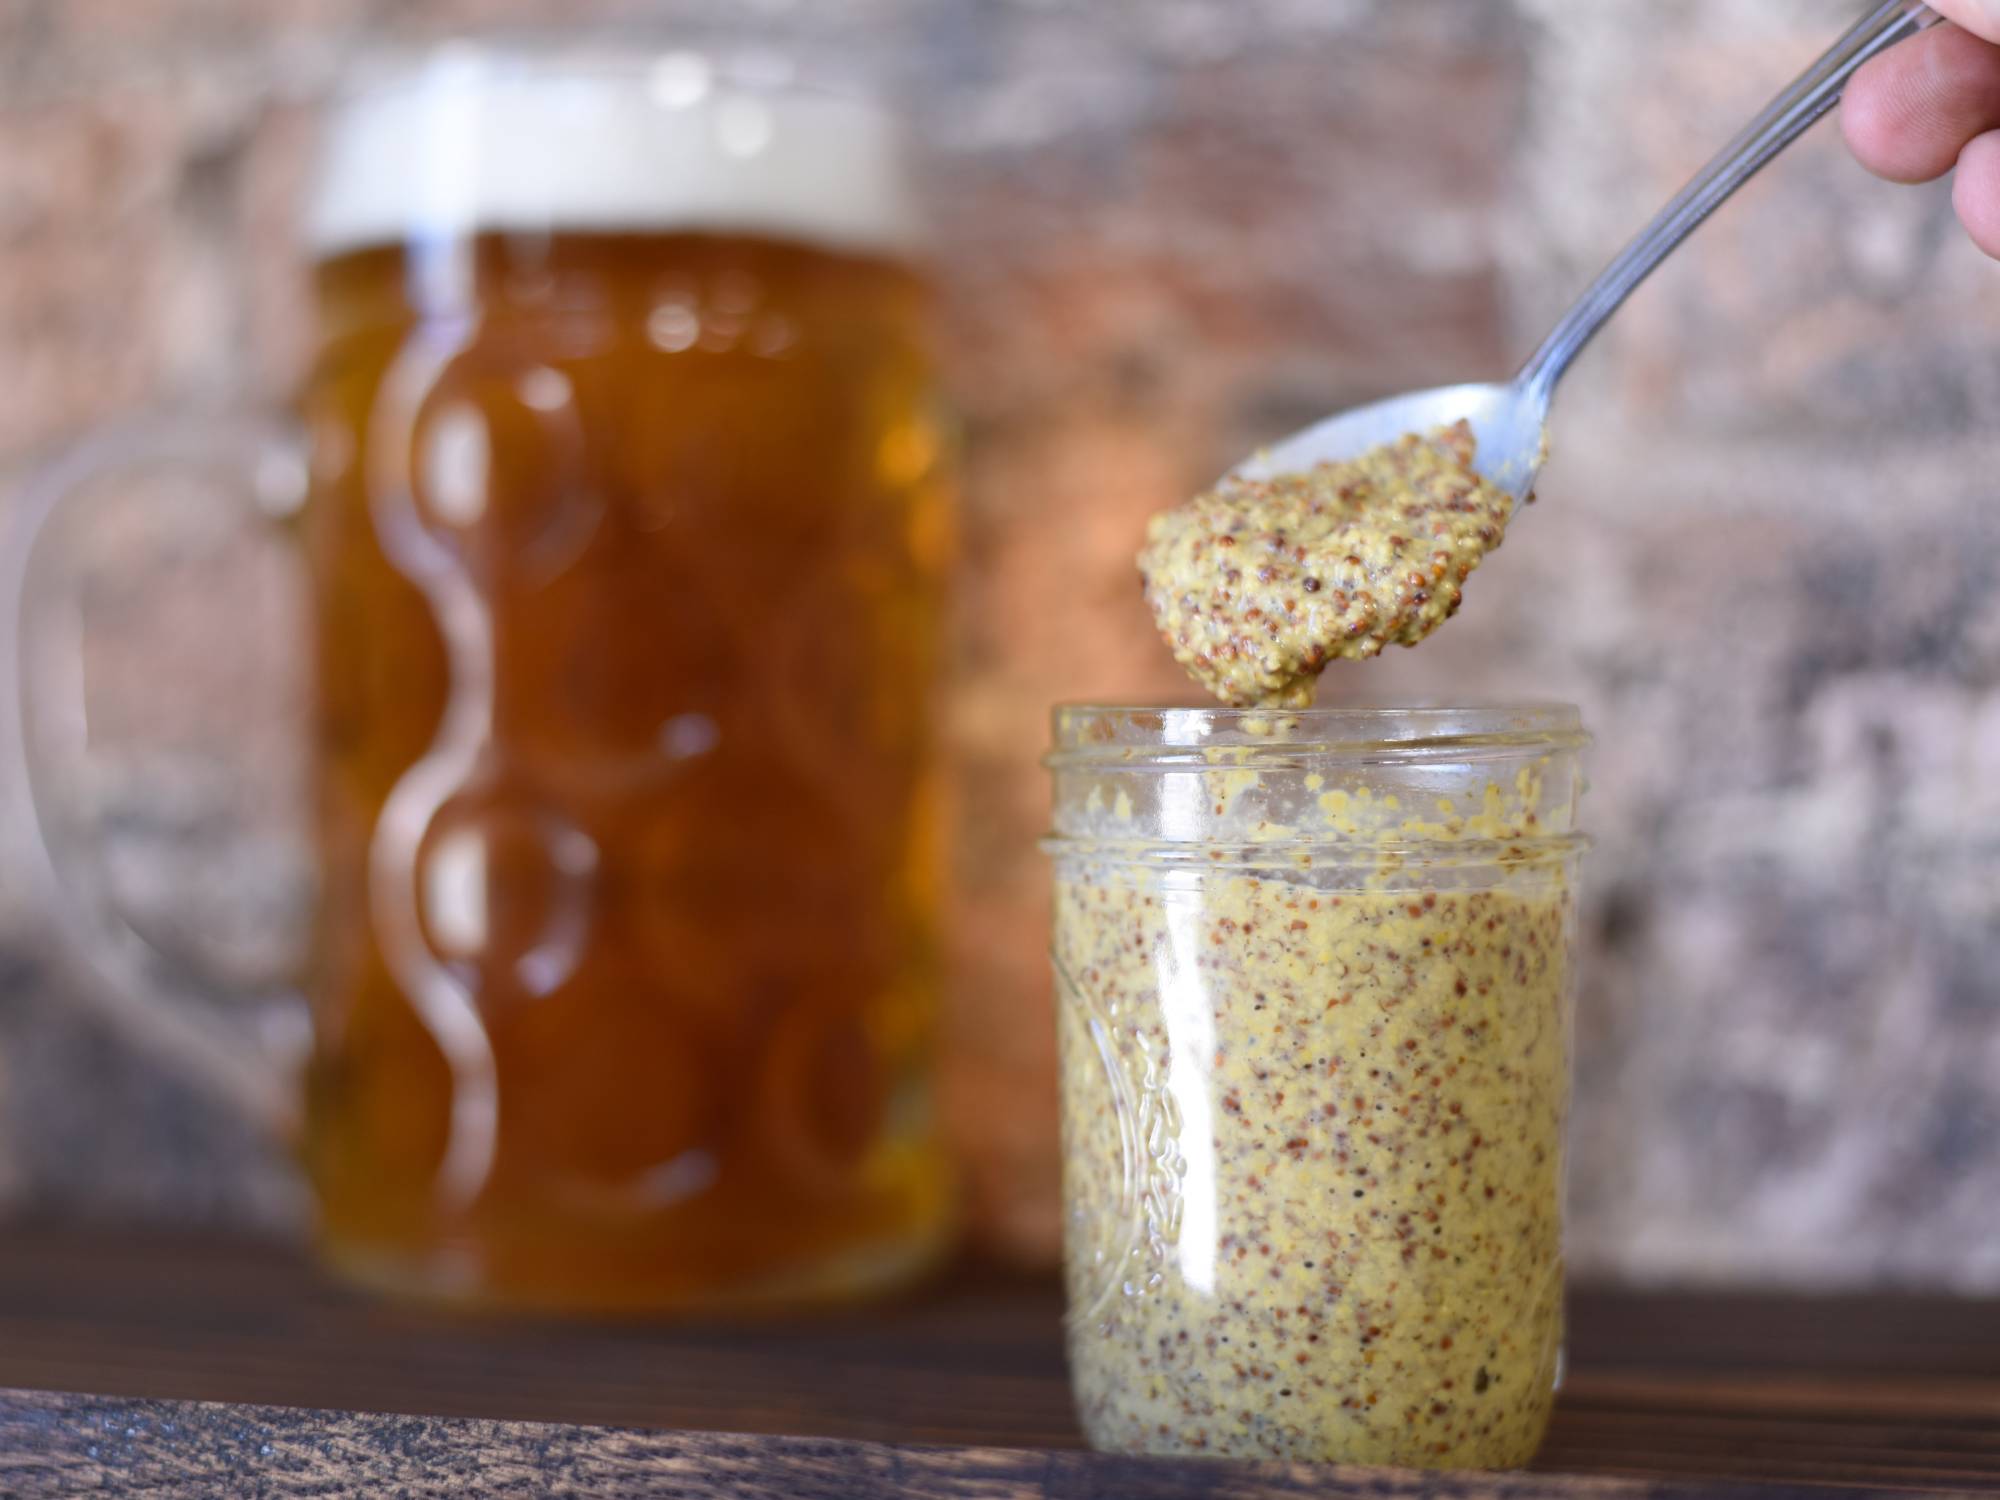 jar of mustard with pitcher of beer in the background